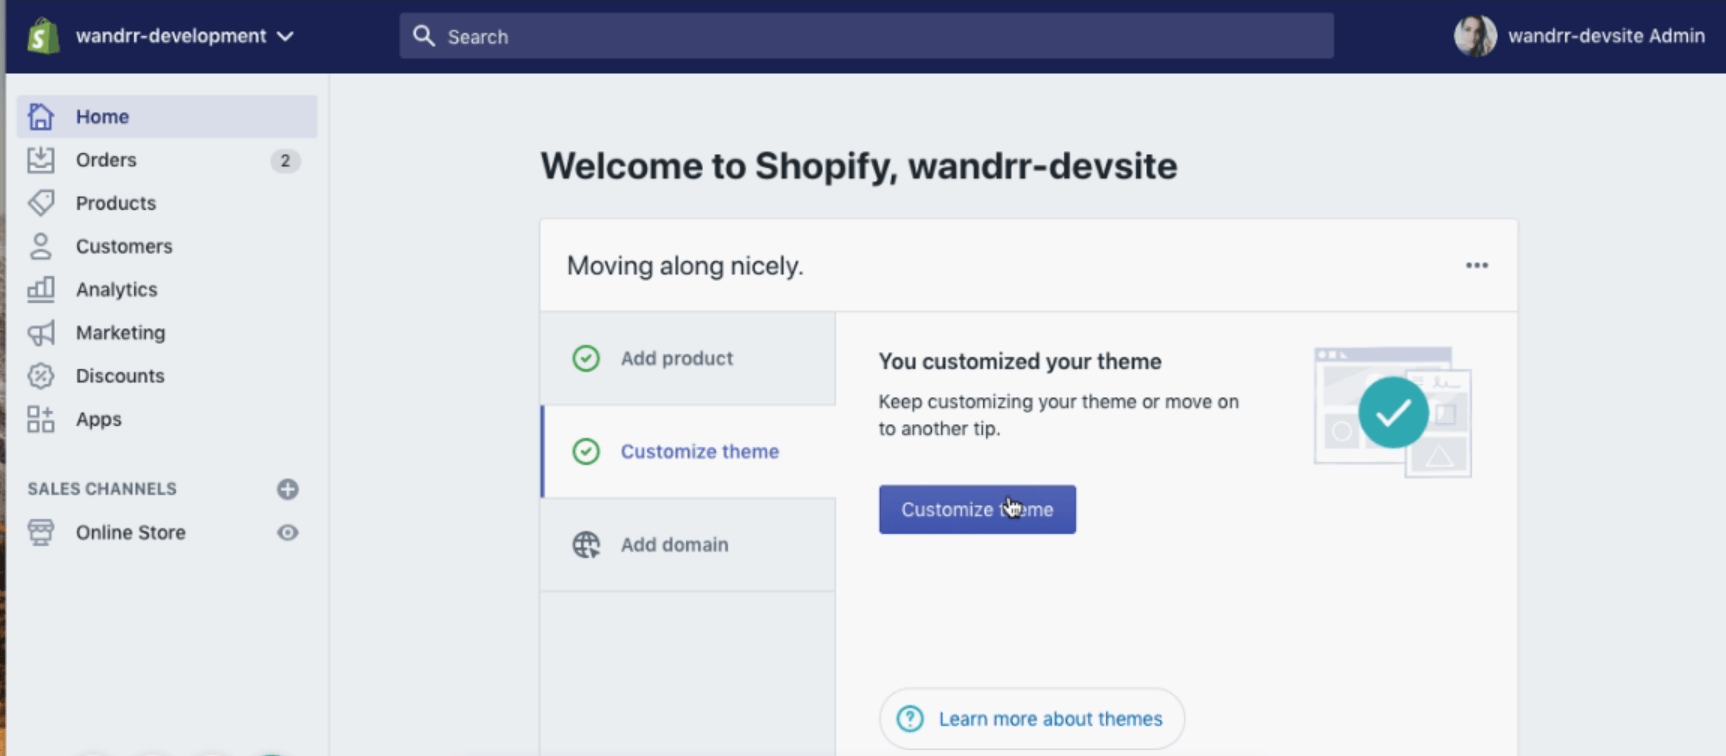 Shopify is more complex